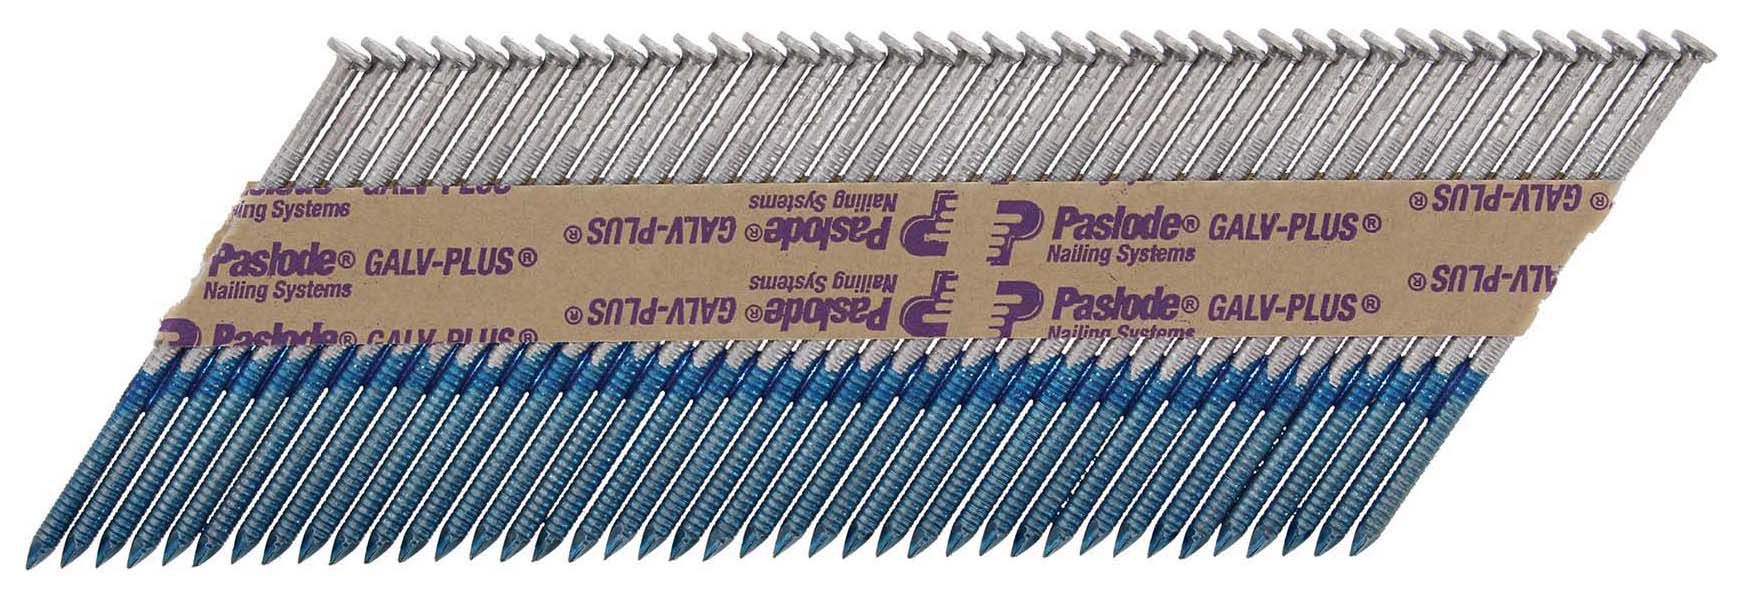 Image of Paslode 360Xi 2.8mm x 51mm Galv-Plus Collated Nails + 1 Fuel Cell - Box of 1100